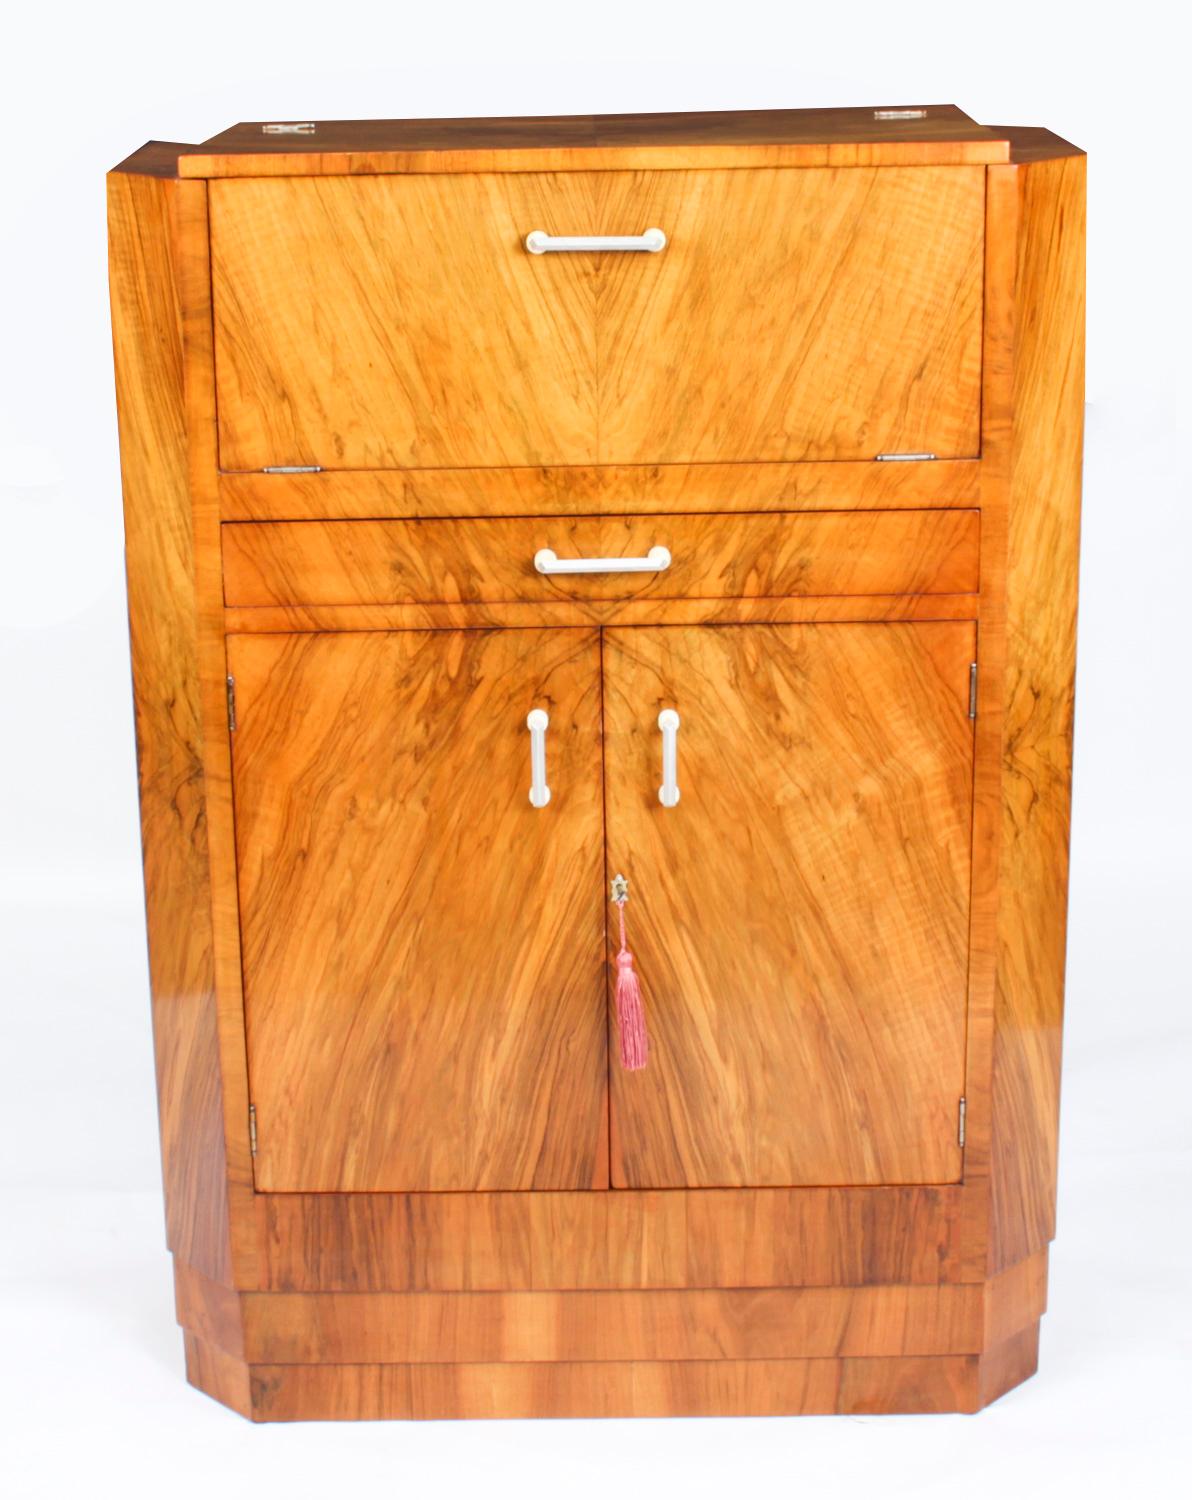 This is a fantastic antique Art Deco burr walnut cocktail cabinet, circa 1920 in date. 

It is of rectangular form, made in beautiful burr walnut, the upper part opens to reveal a fitted mirrored interior with bottle and decanter racks. 

Below